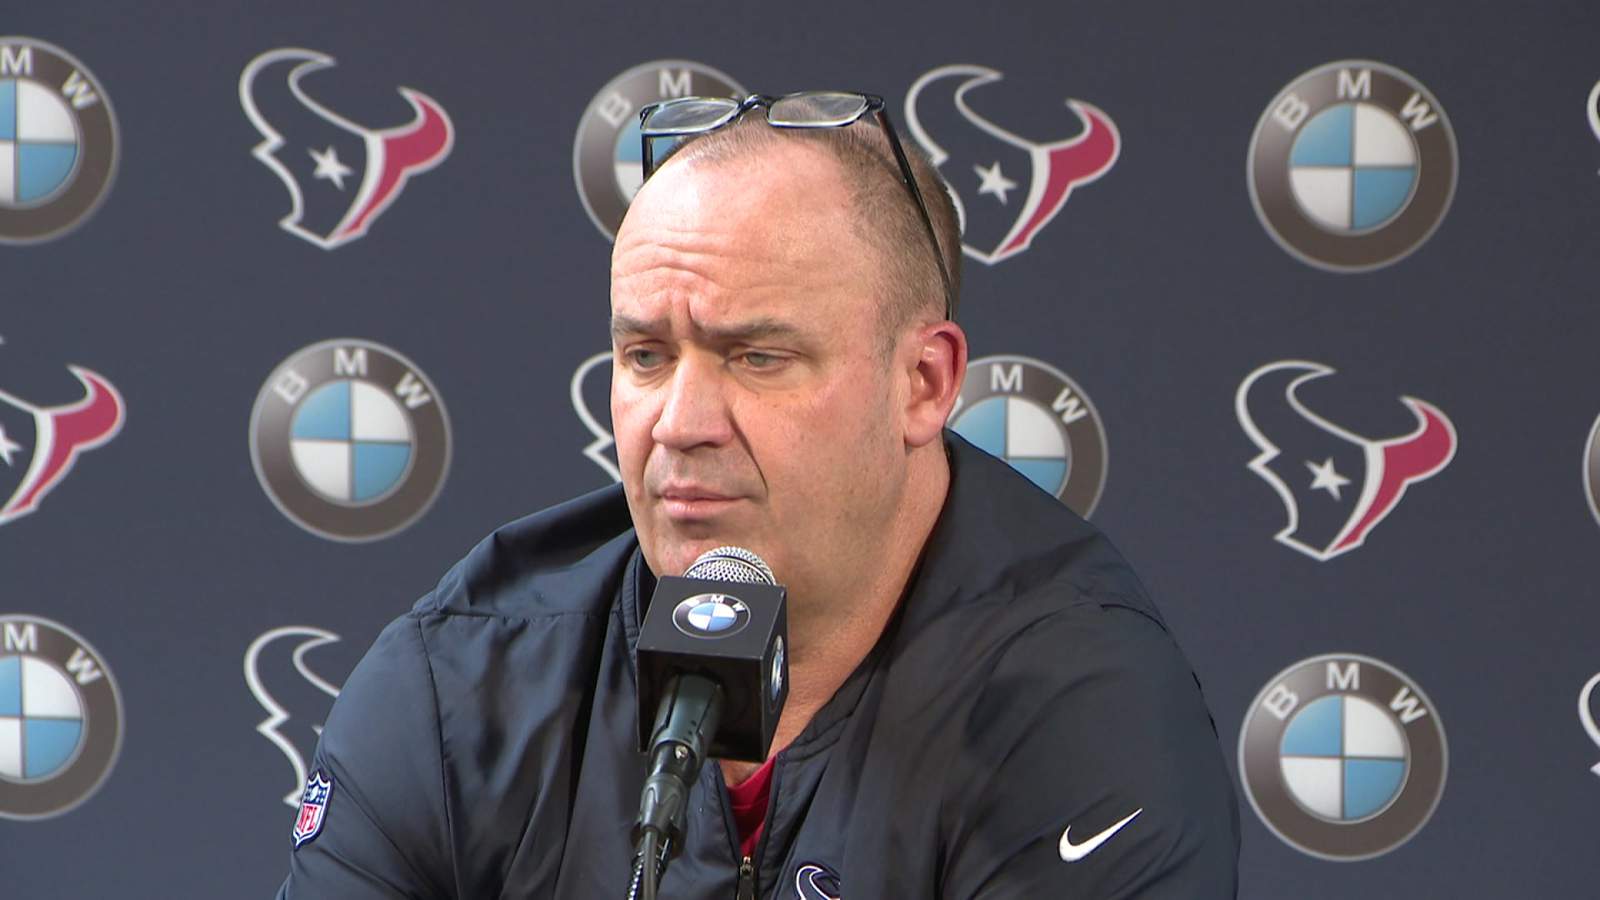 Here’s what Bill O’Brien said in Monday’s press conference after Texans disappointing loss to Chiefs